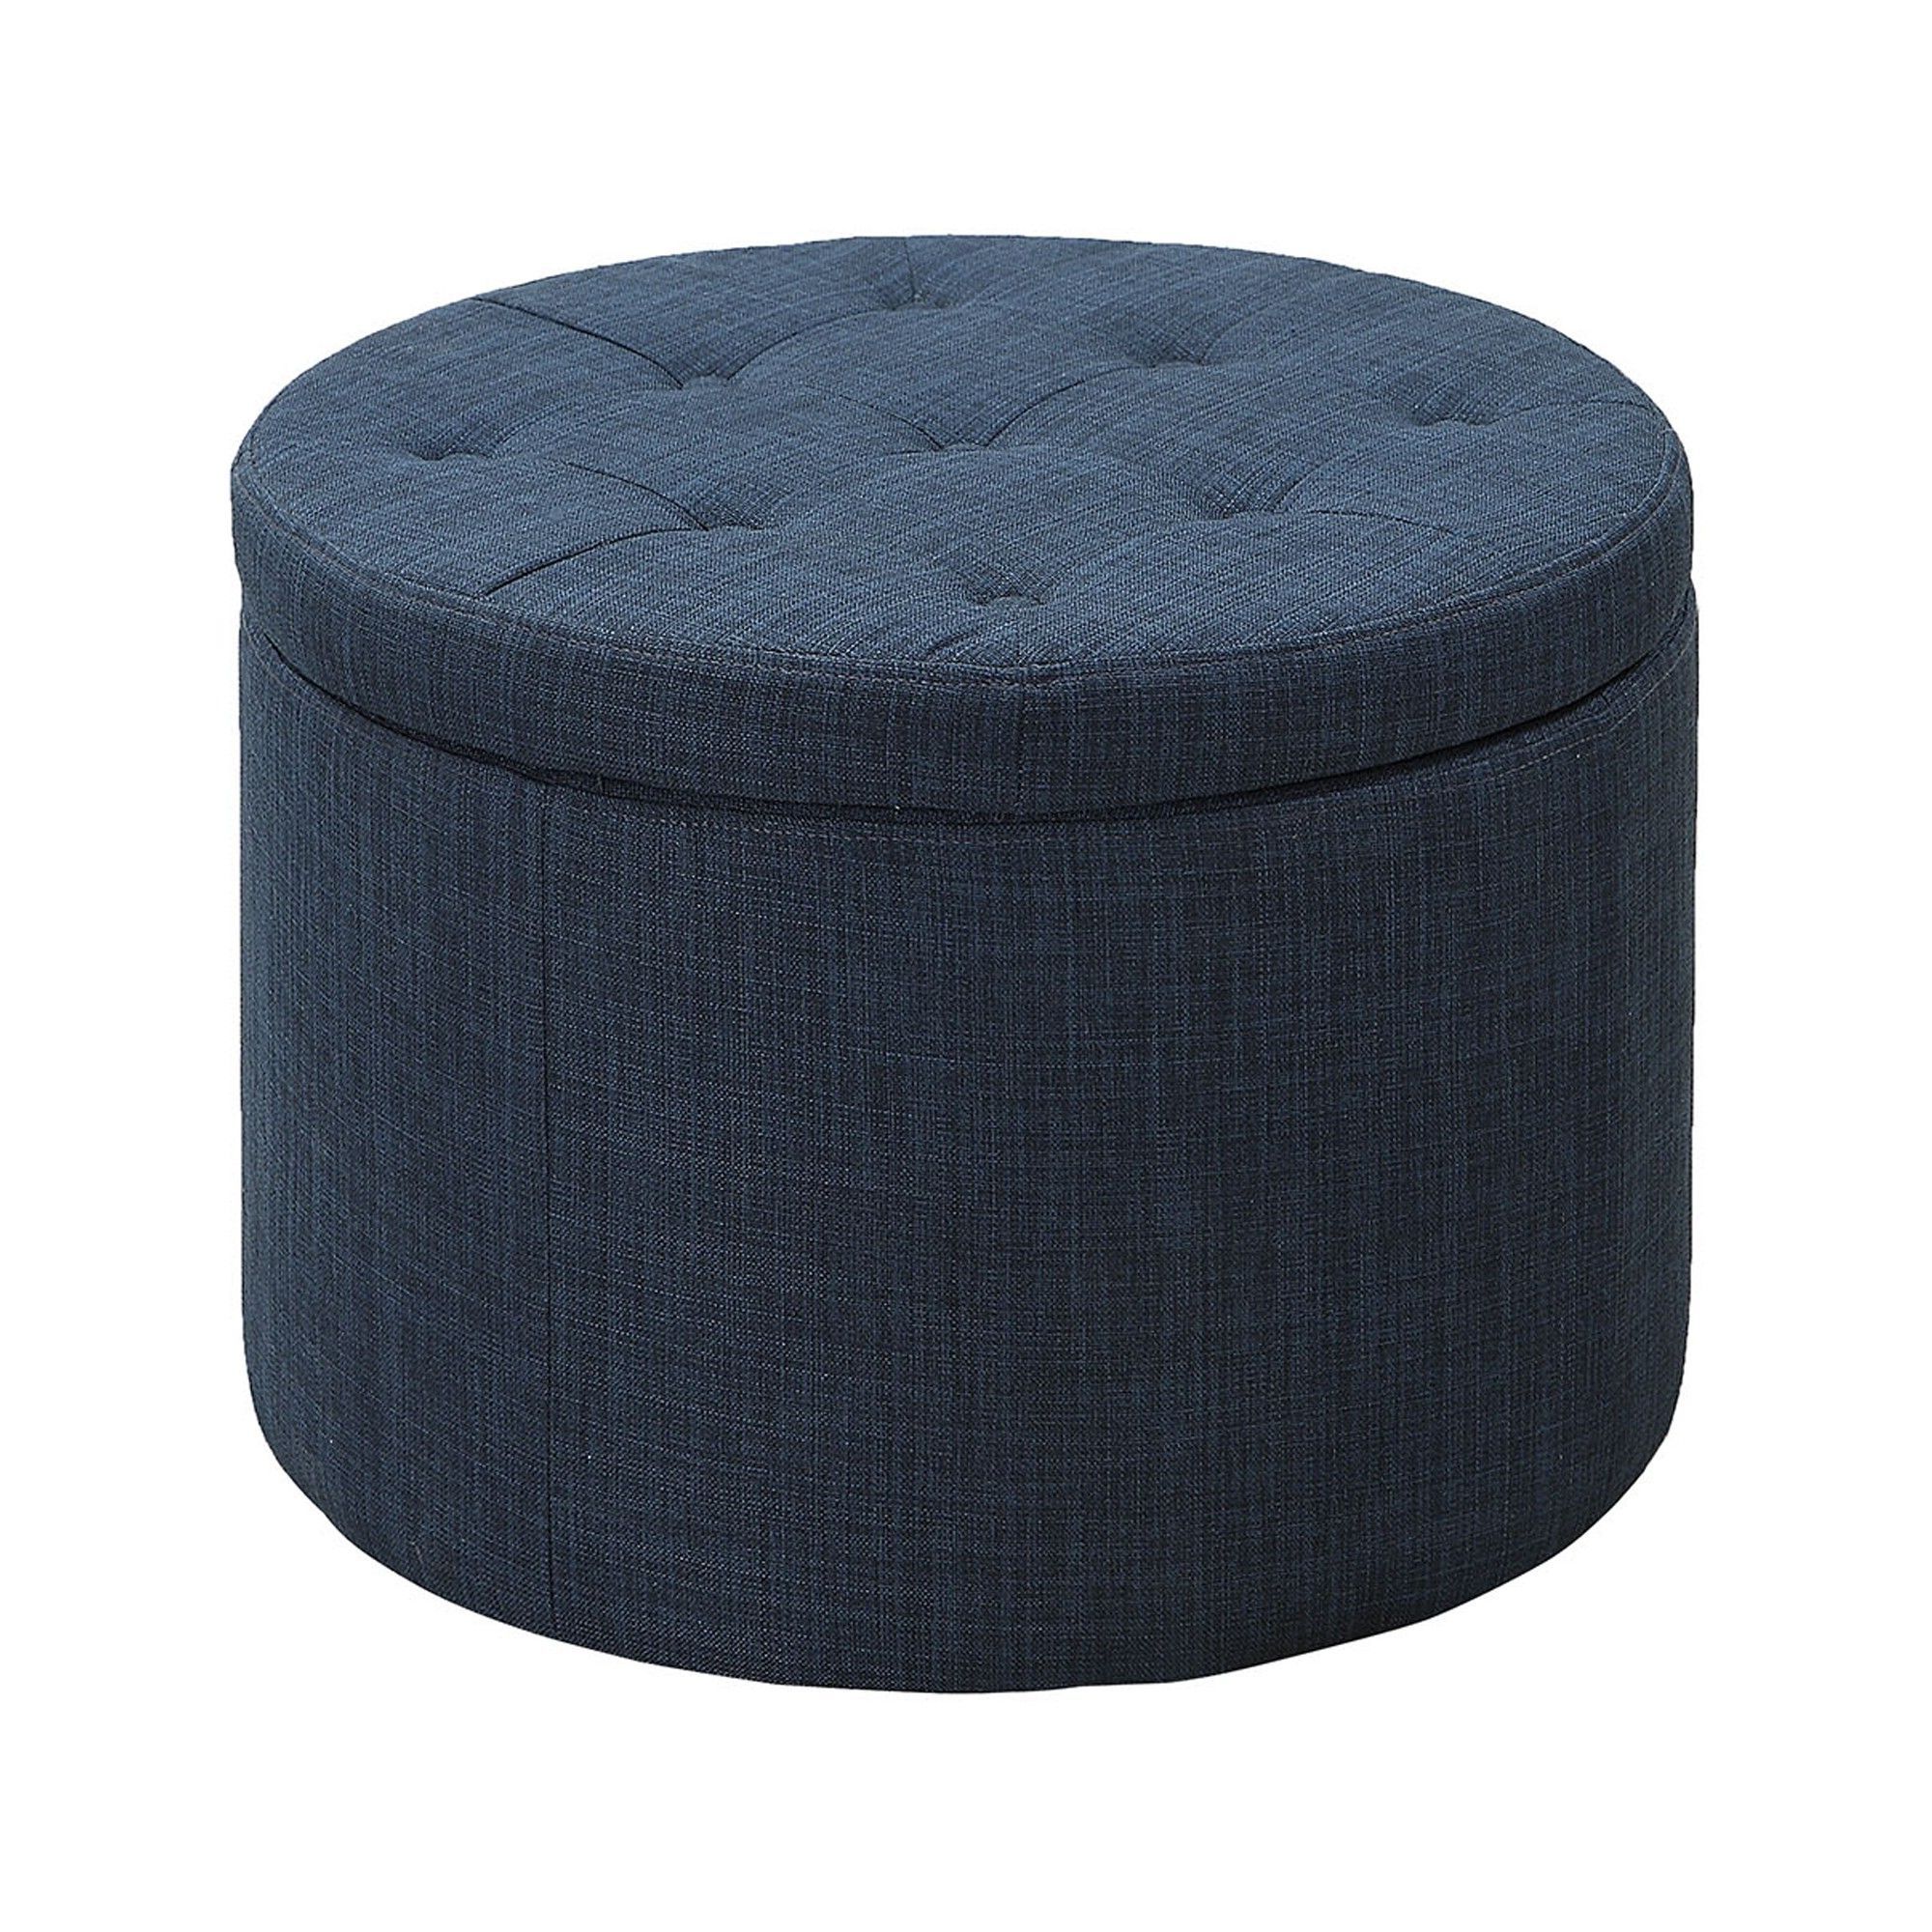 Round Shoe Ottoman Blue Fabric – Breighton Home (View 7 of 10)